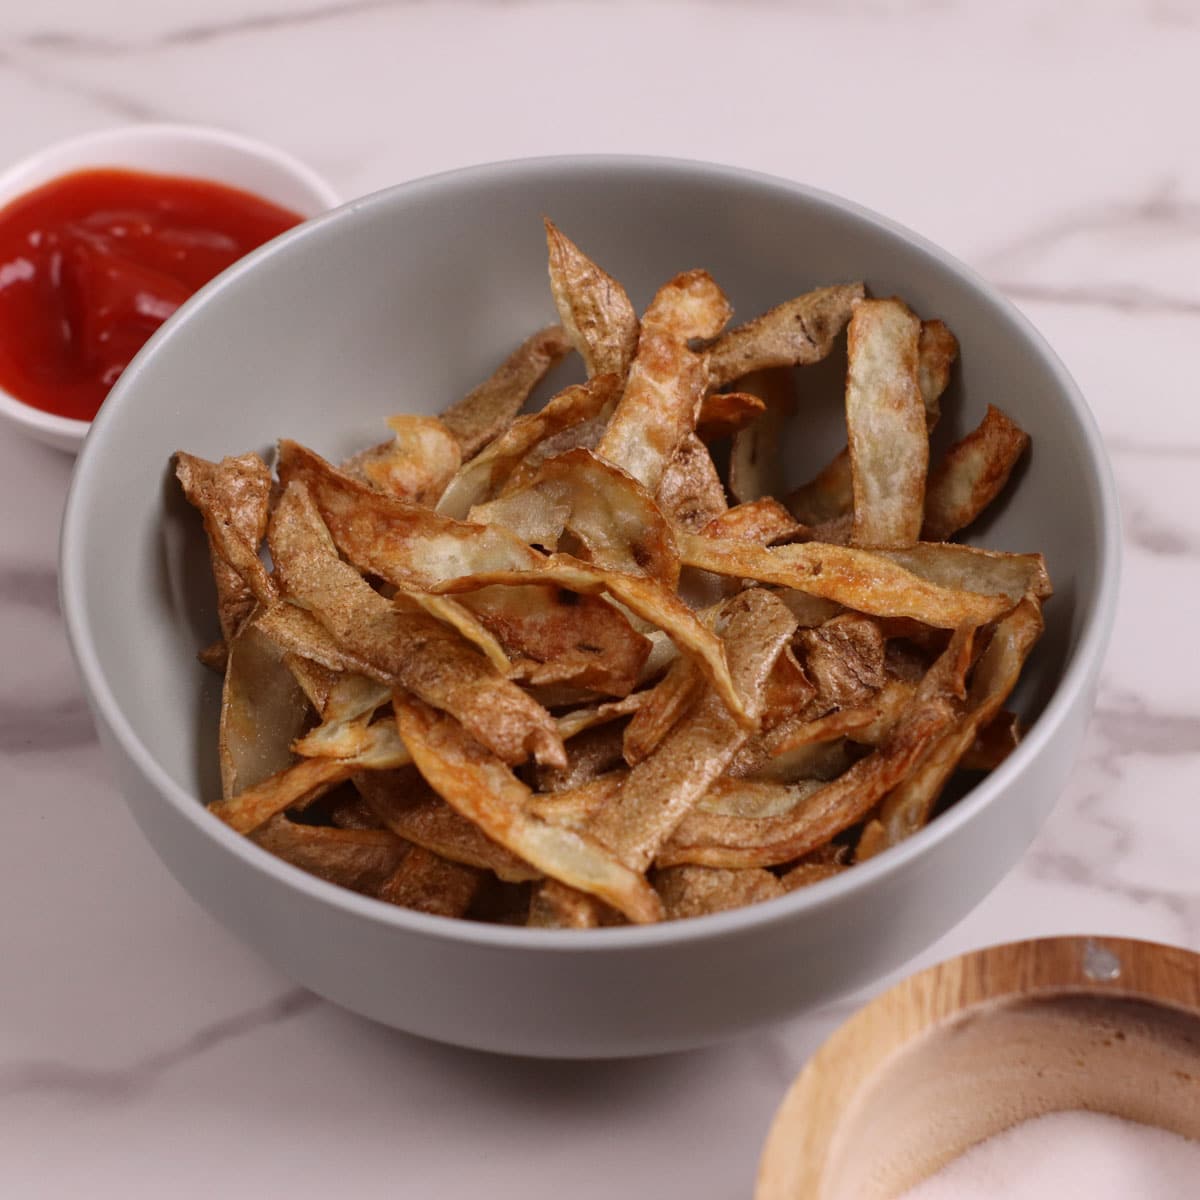 Air fried potato skin chips with ketchup on the side.